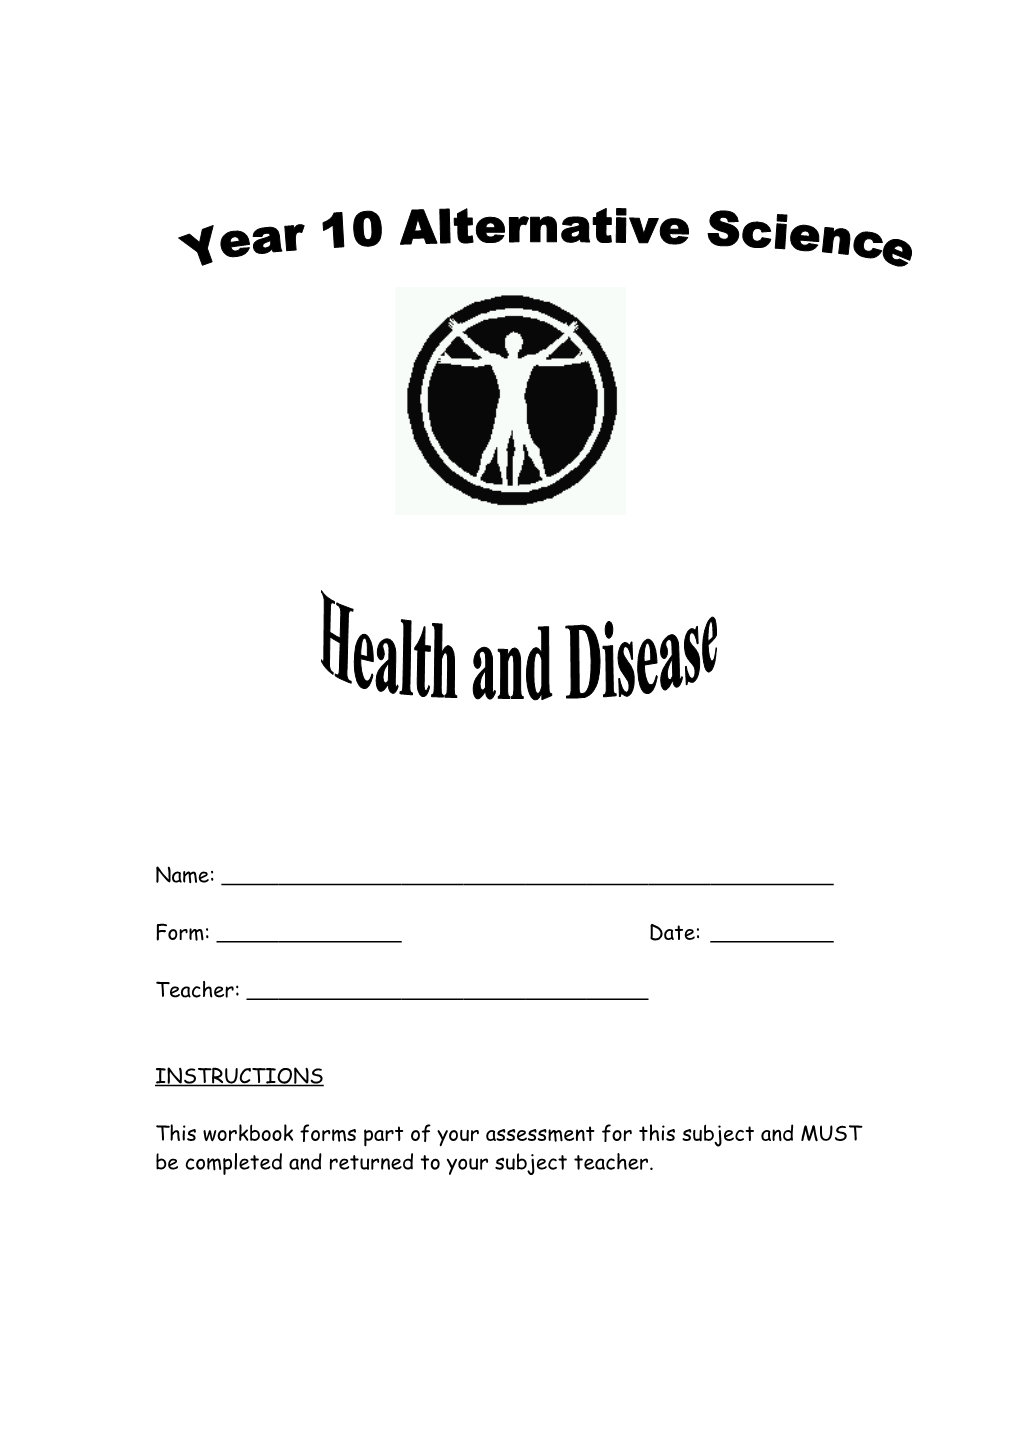 This Workbook Forms Part of Your Assessment for This Subject and MUST Be Completed And